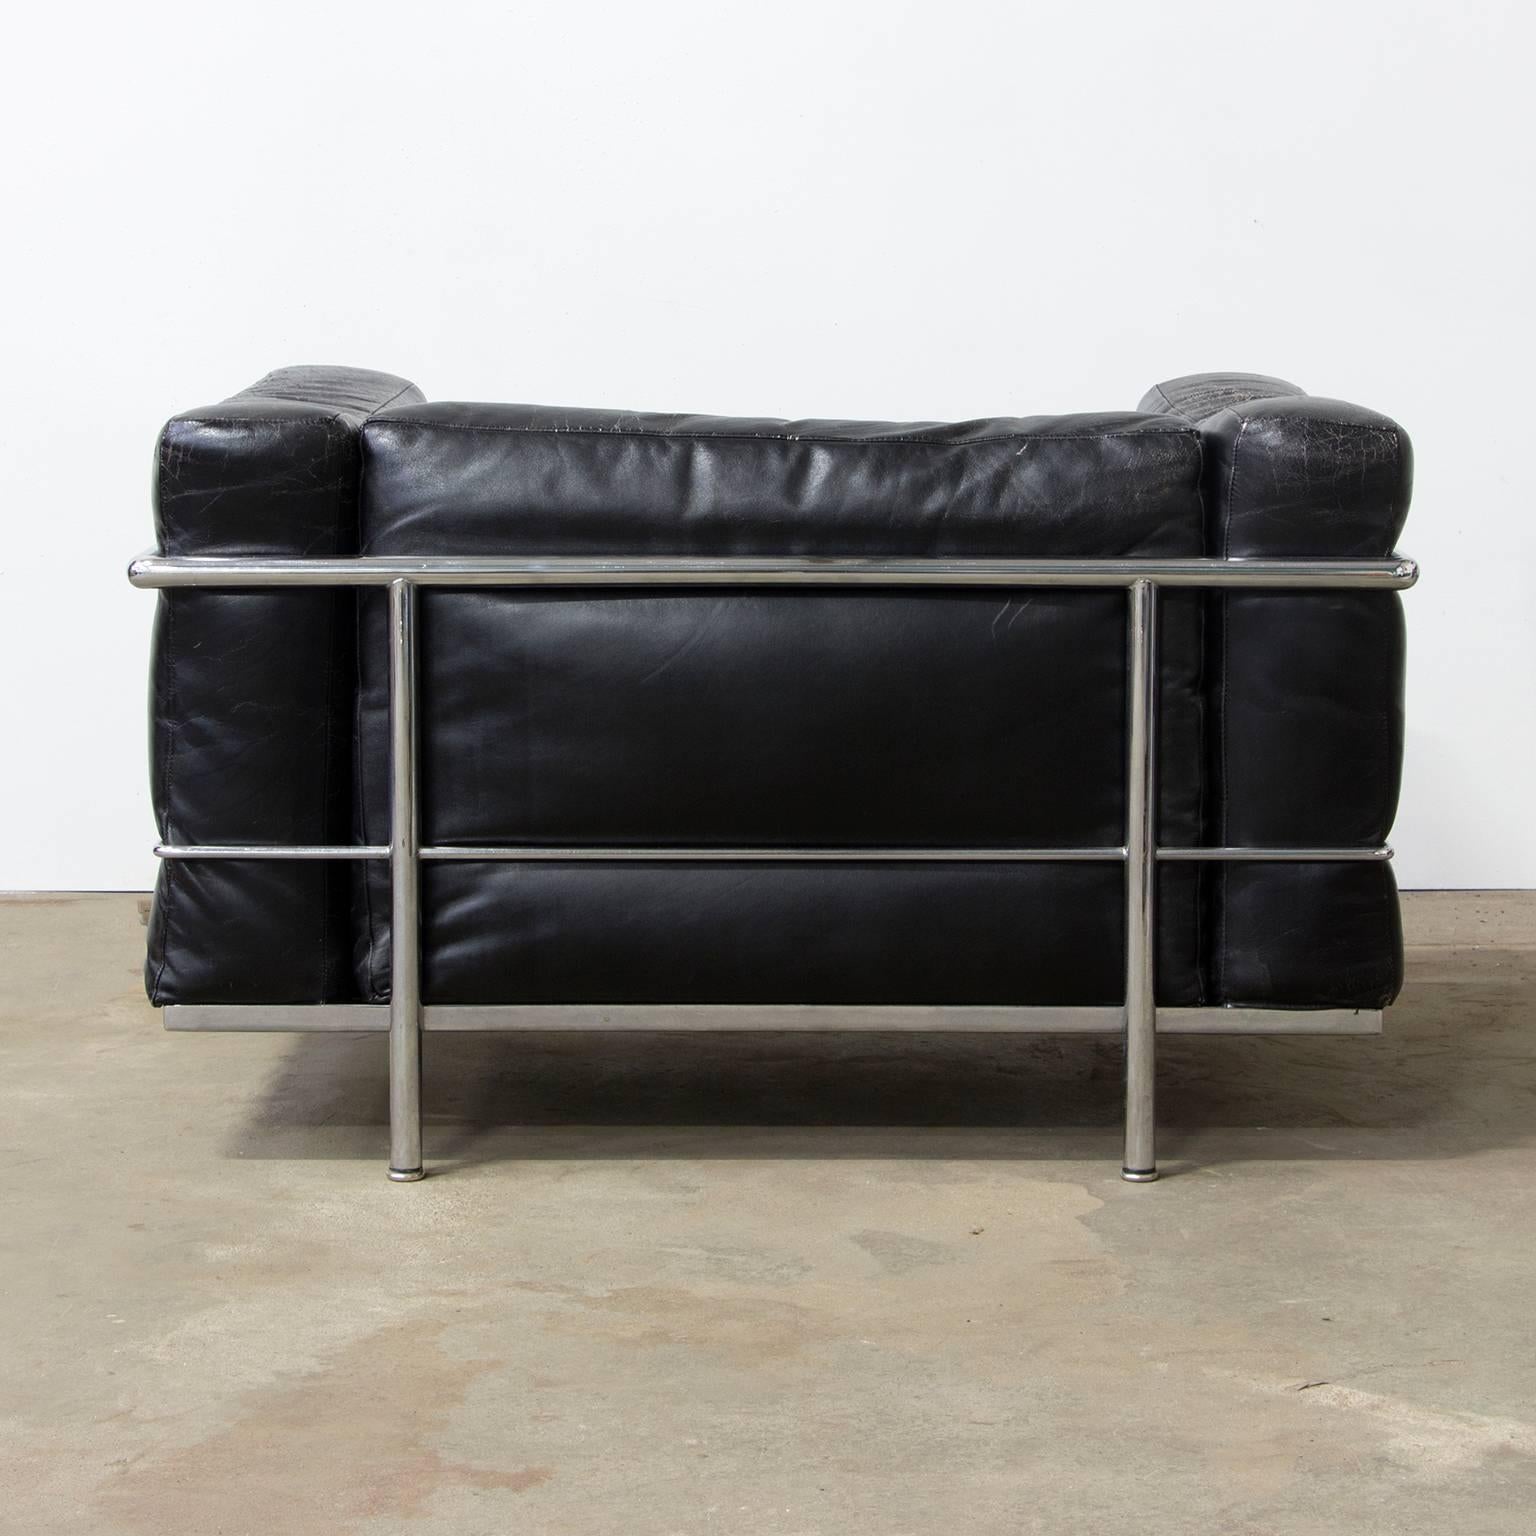 Bauhaus Le Corbusier, Very Early LC Three by Cassina in Chrome in Black Patin Leather